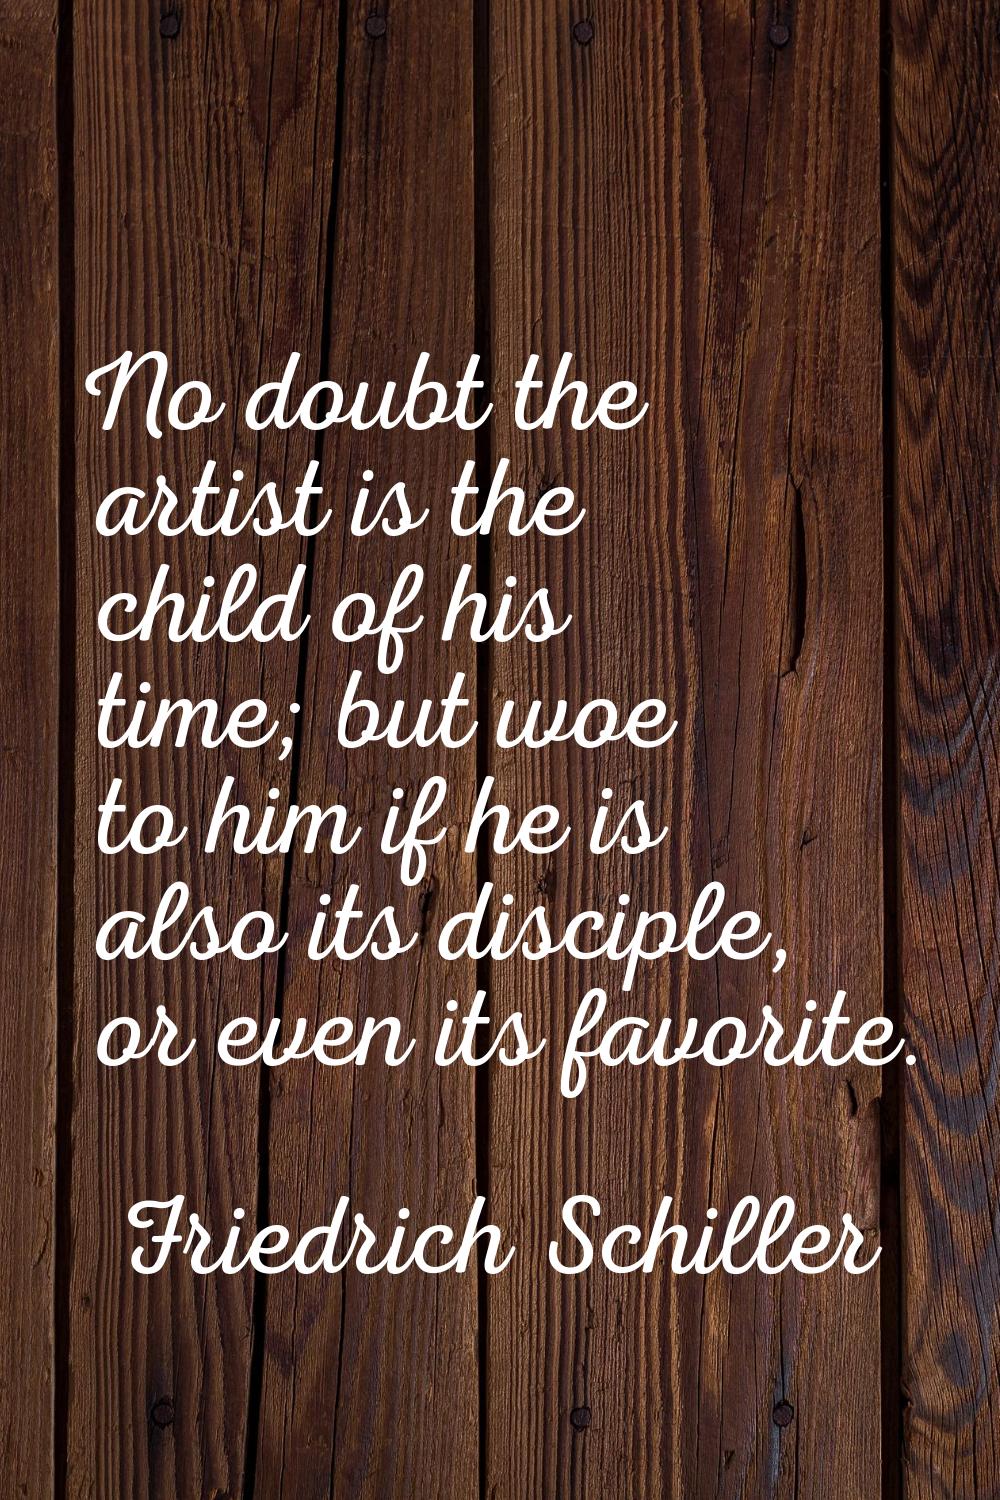 No doubt the artist is the child of his time; but woe to him if he is also its disciple, or even it